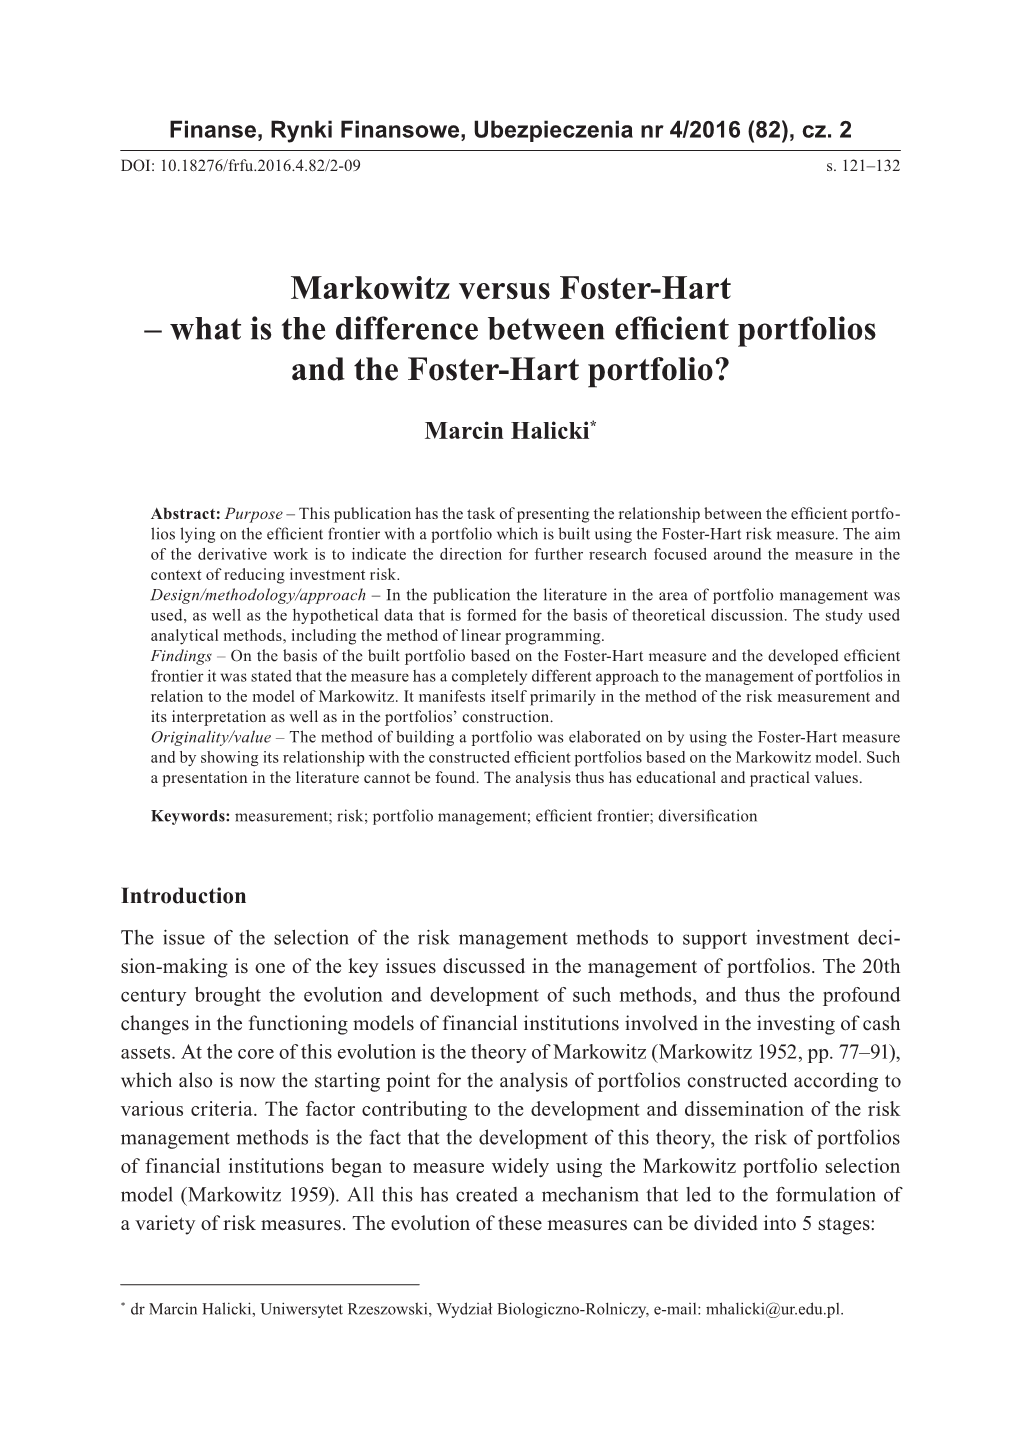 Markowitz Versus Foster-Hart – What Is the Difference Between Efficient Portfolios and the Foster-Hart Portfolio?